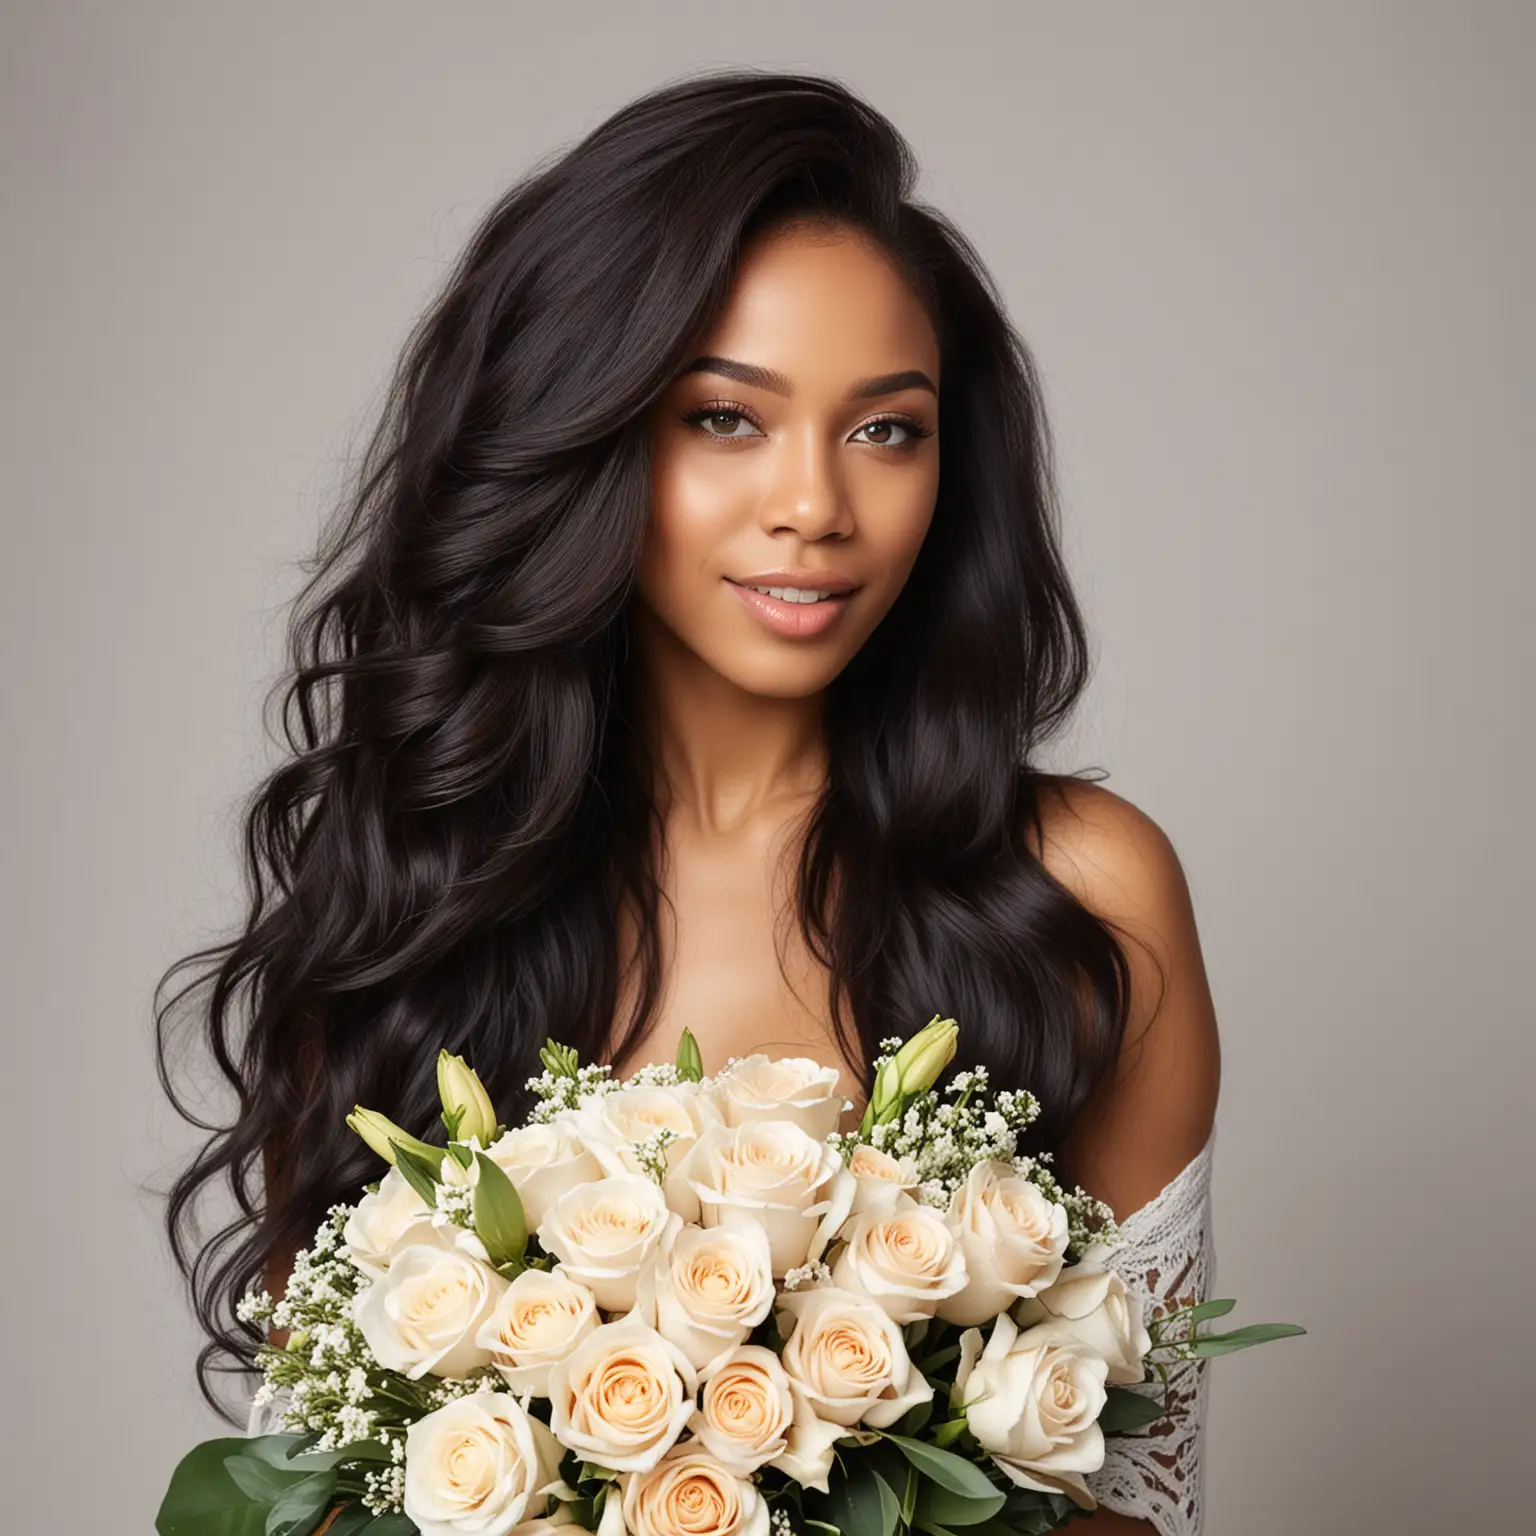 gorgeous light skin black woman with long hair and flower bouquet, luxury